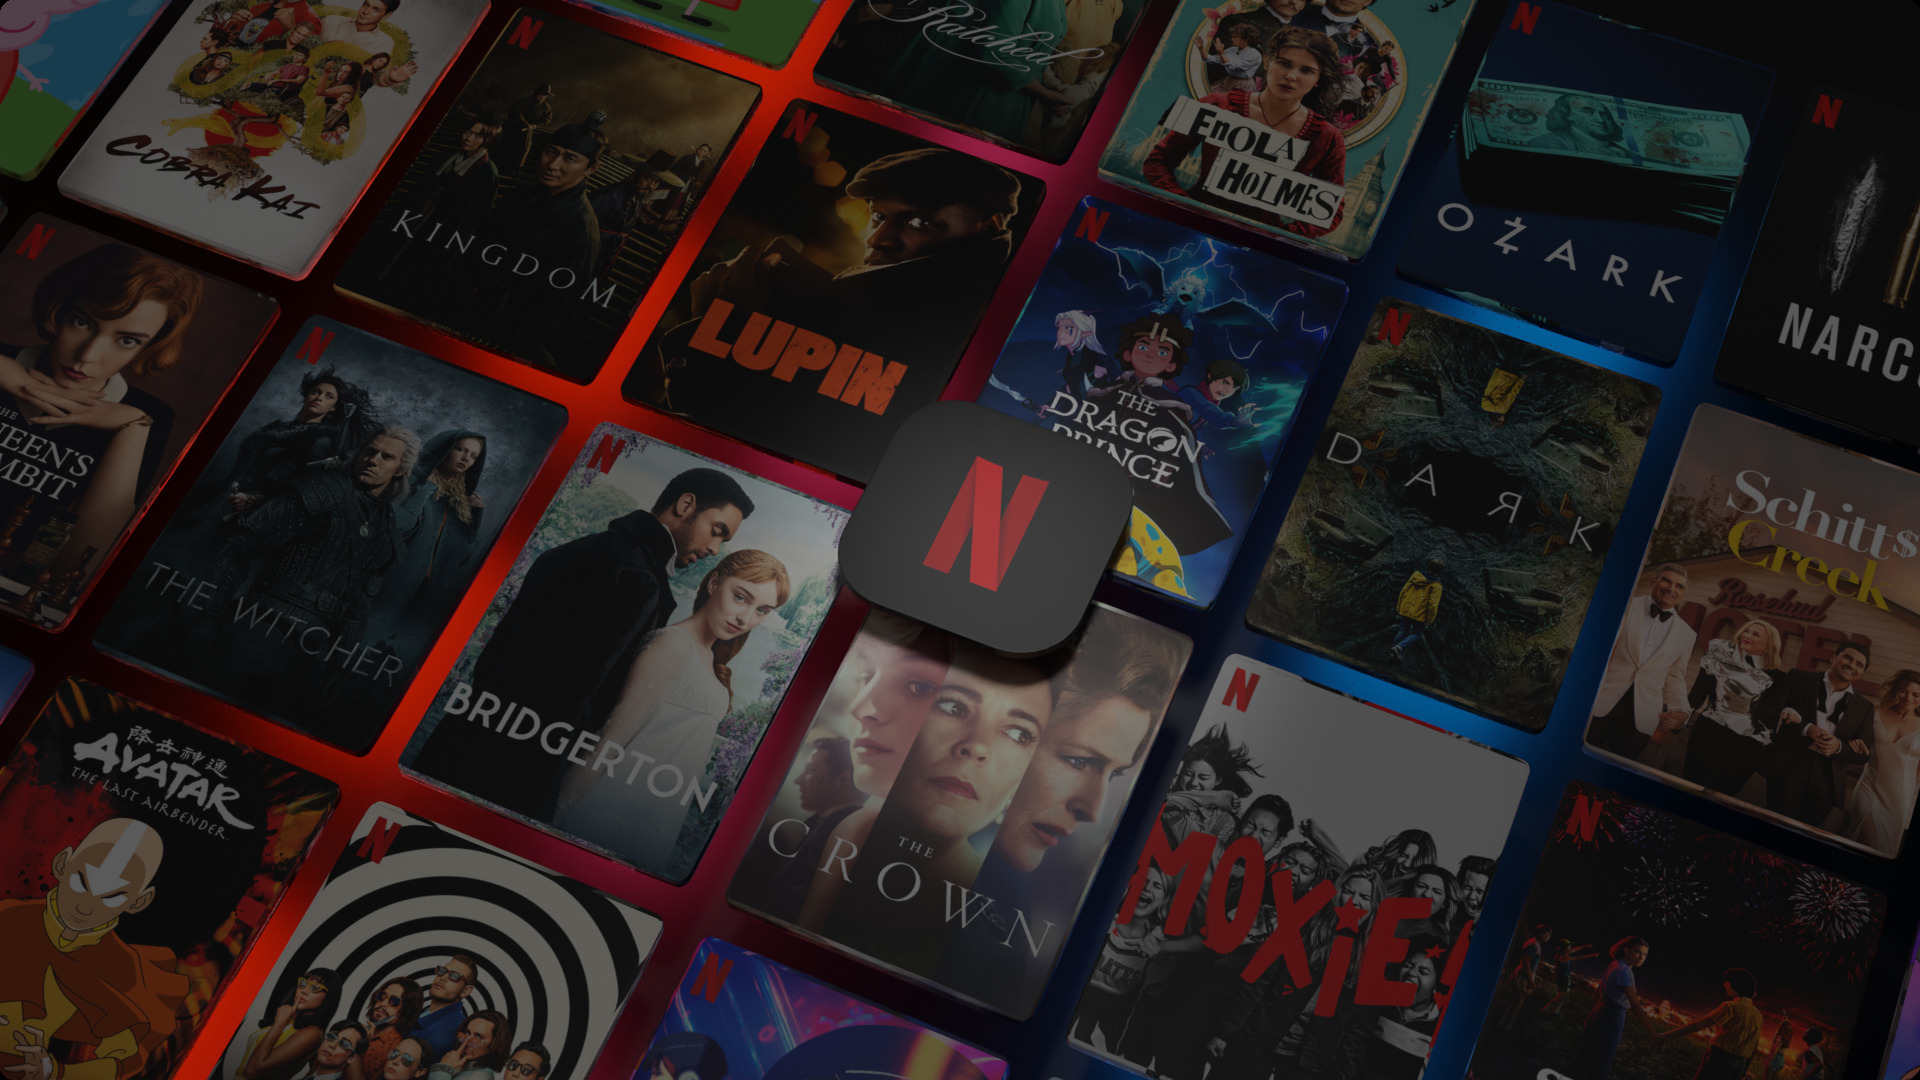 Netflix to charge extra fees for extra users in 2023 - PhoneArena